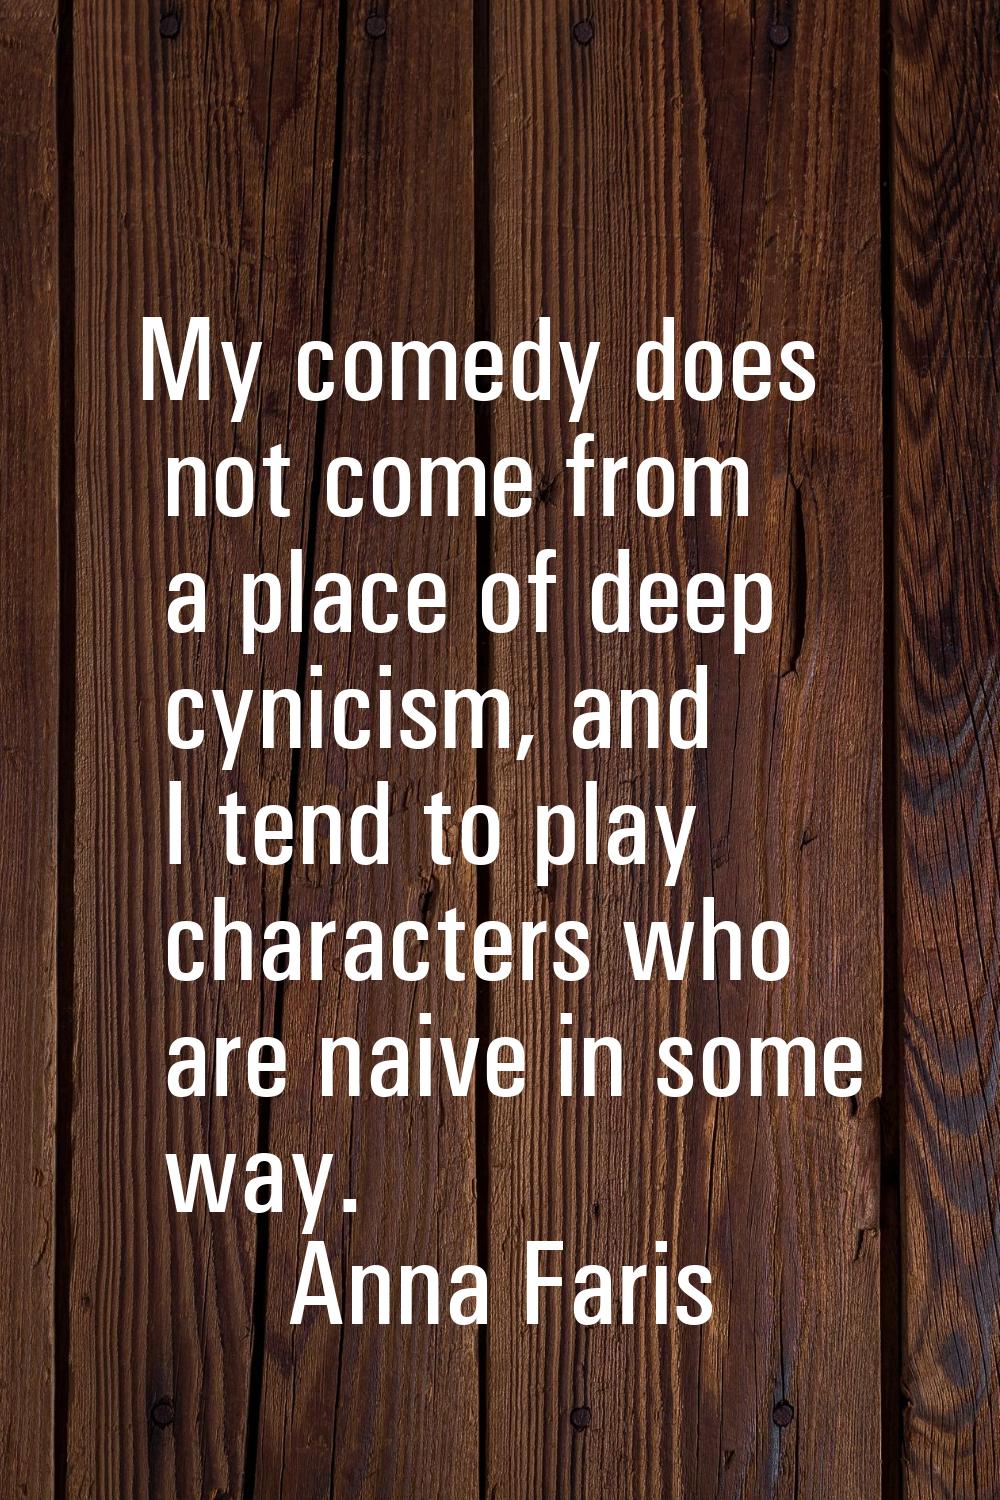 My comedy does not come from a place of deep cynicism, and I tend to play characters who are naive 